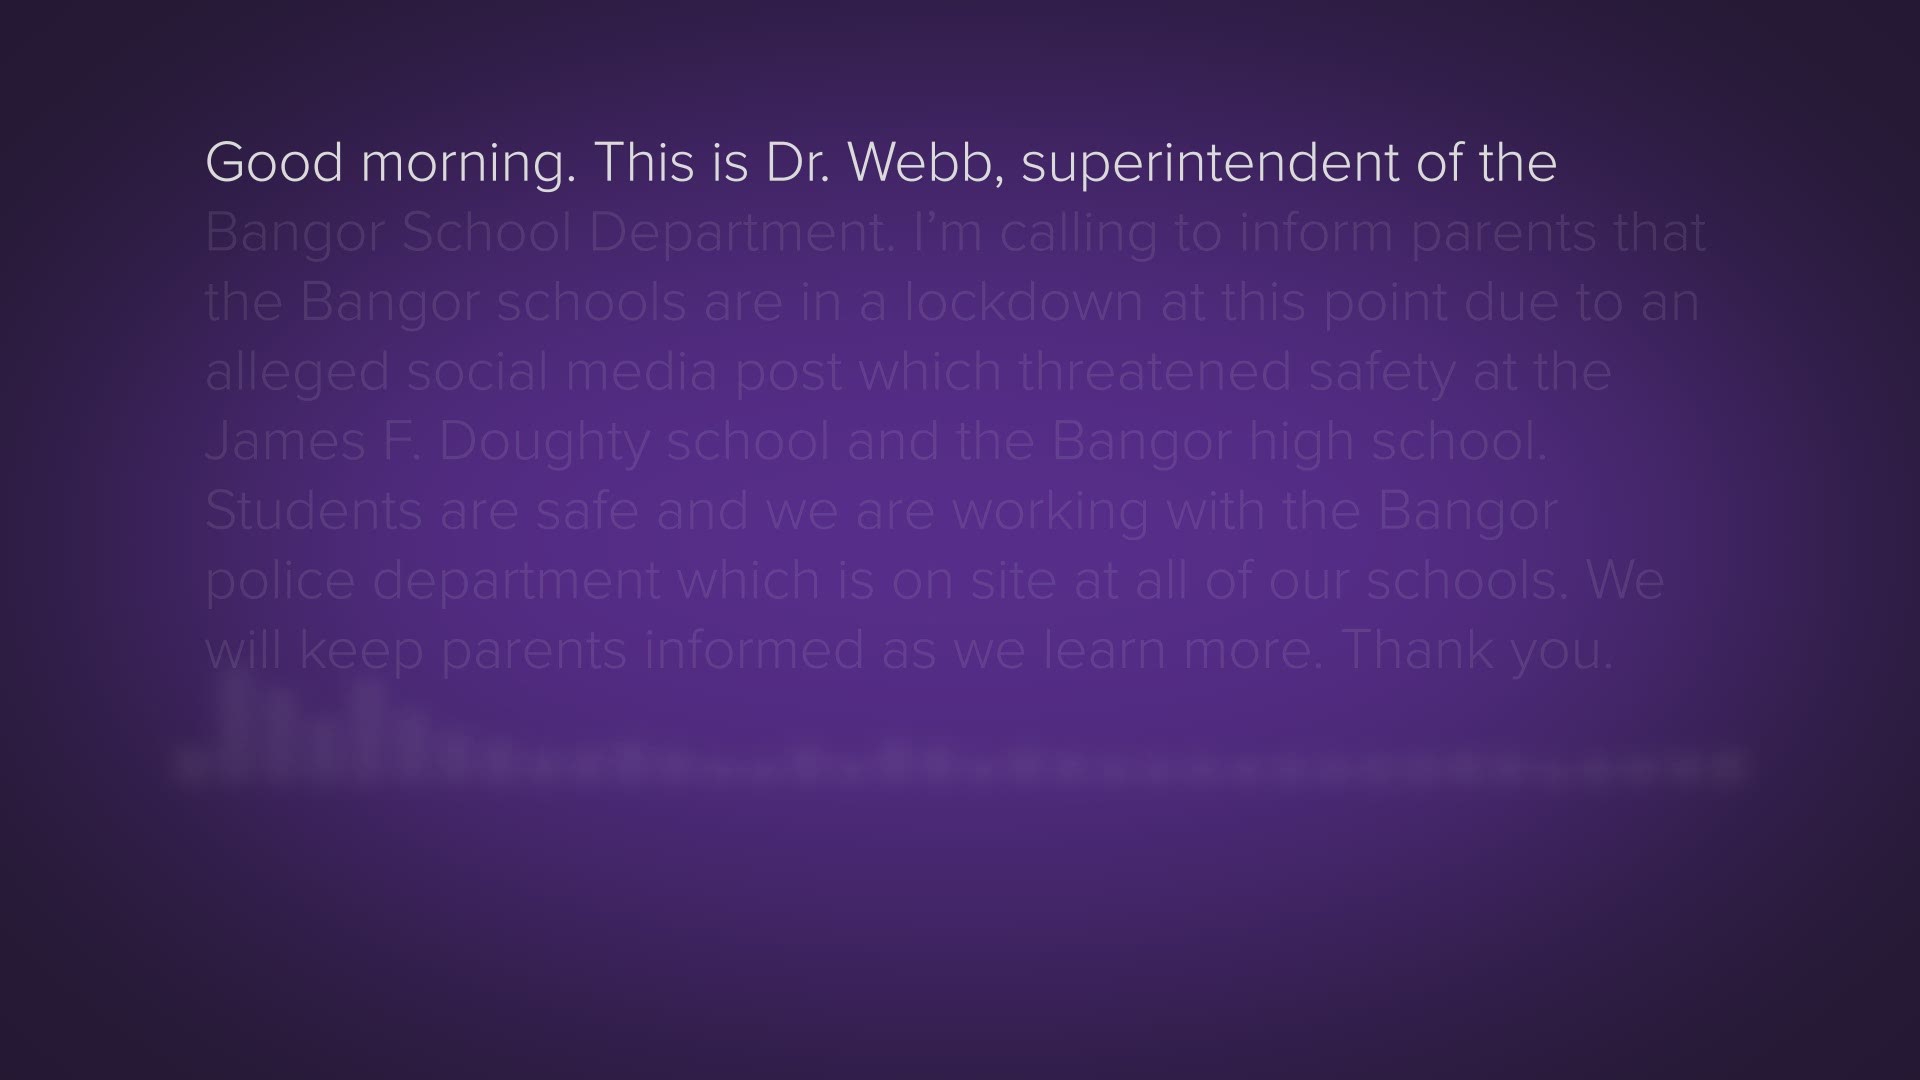 Following lockdown protocalls, Bangor school superintendent Dr. Betsy Webb sent this robocall to all parents.